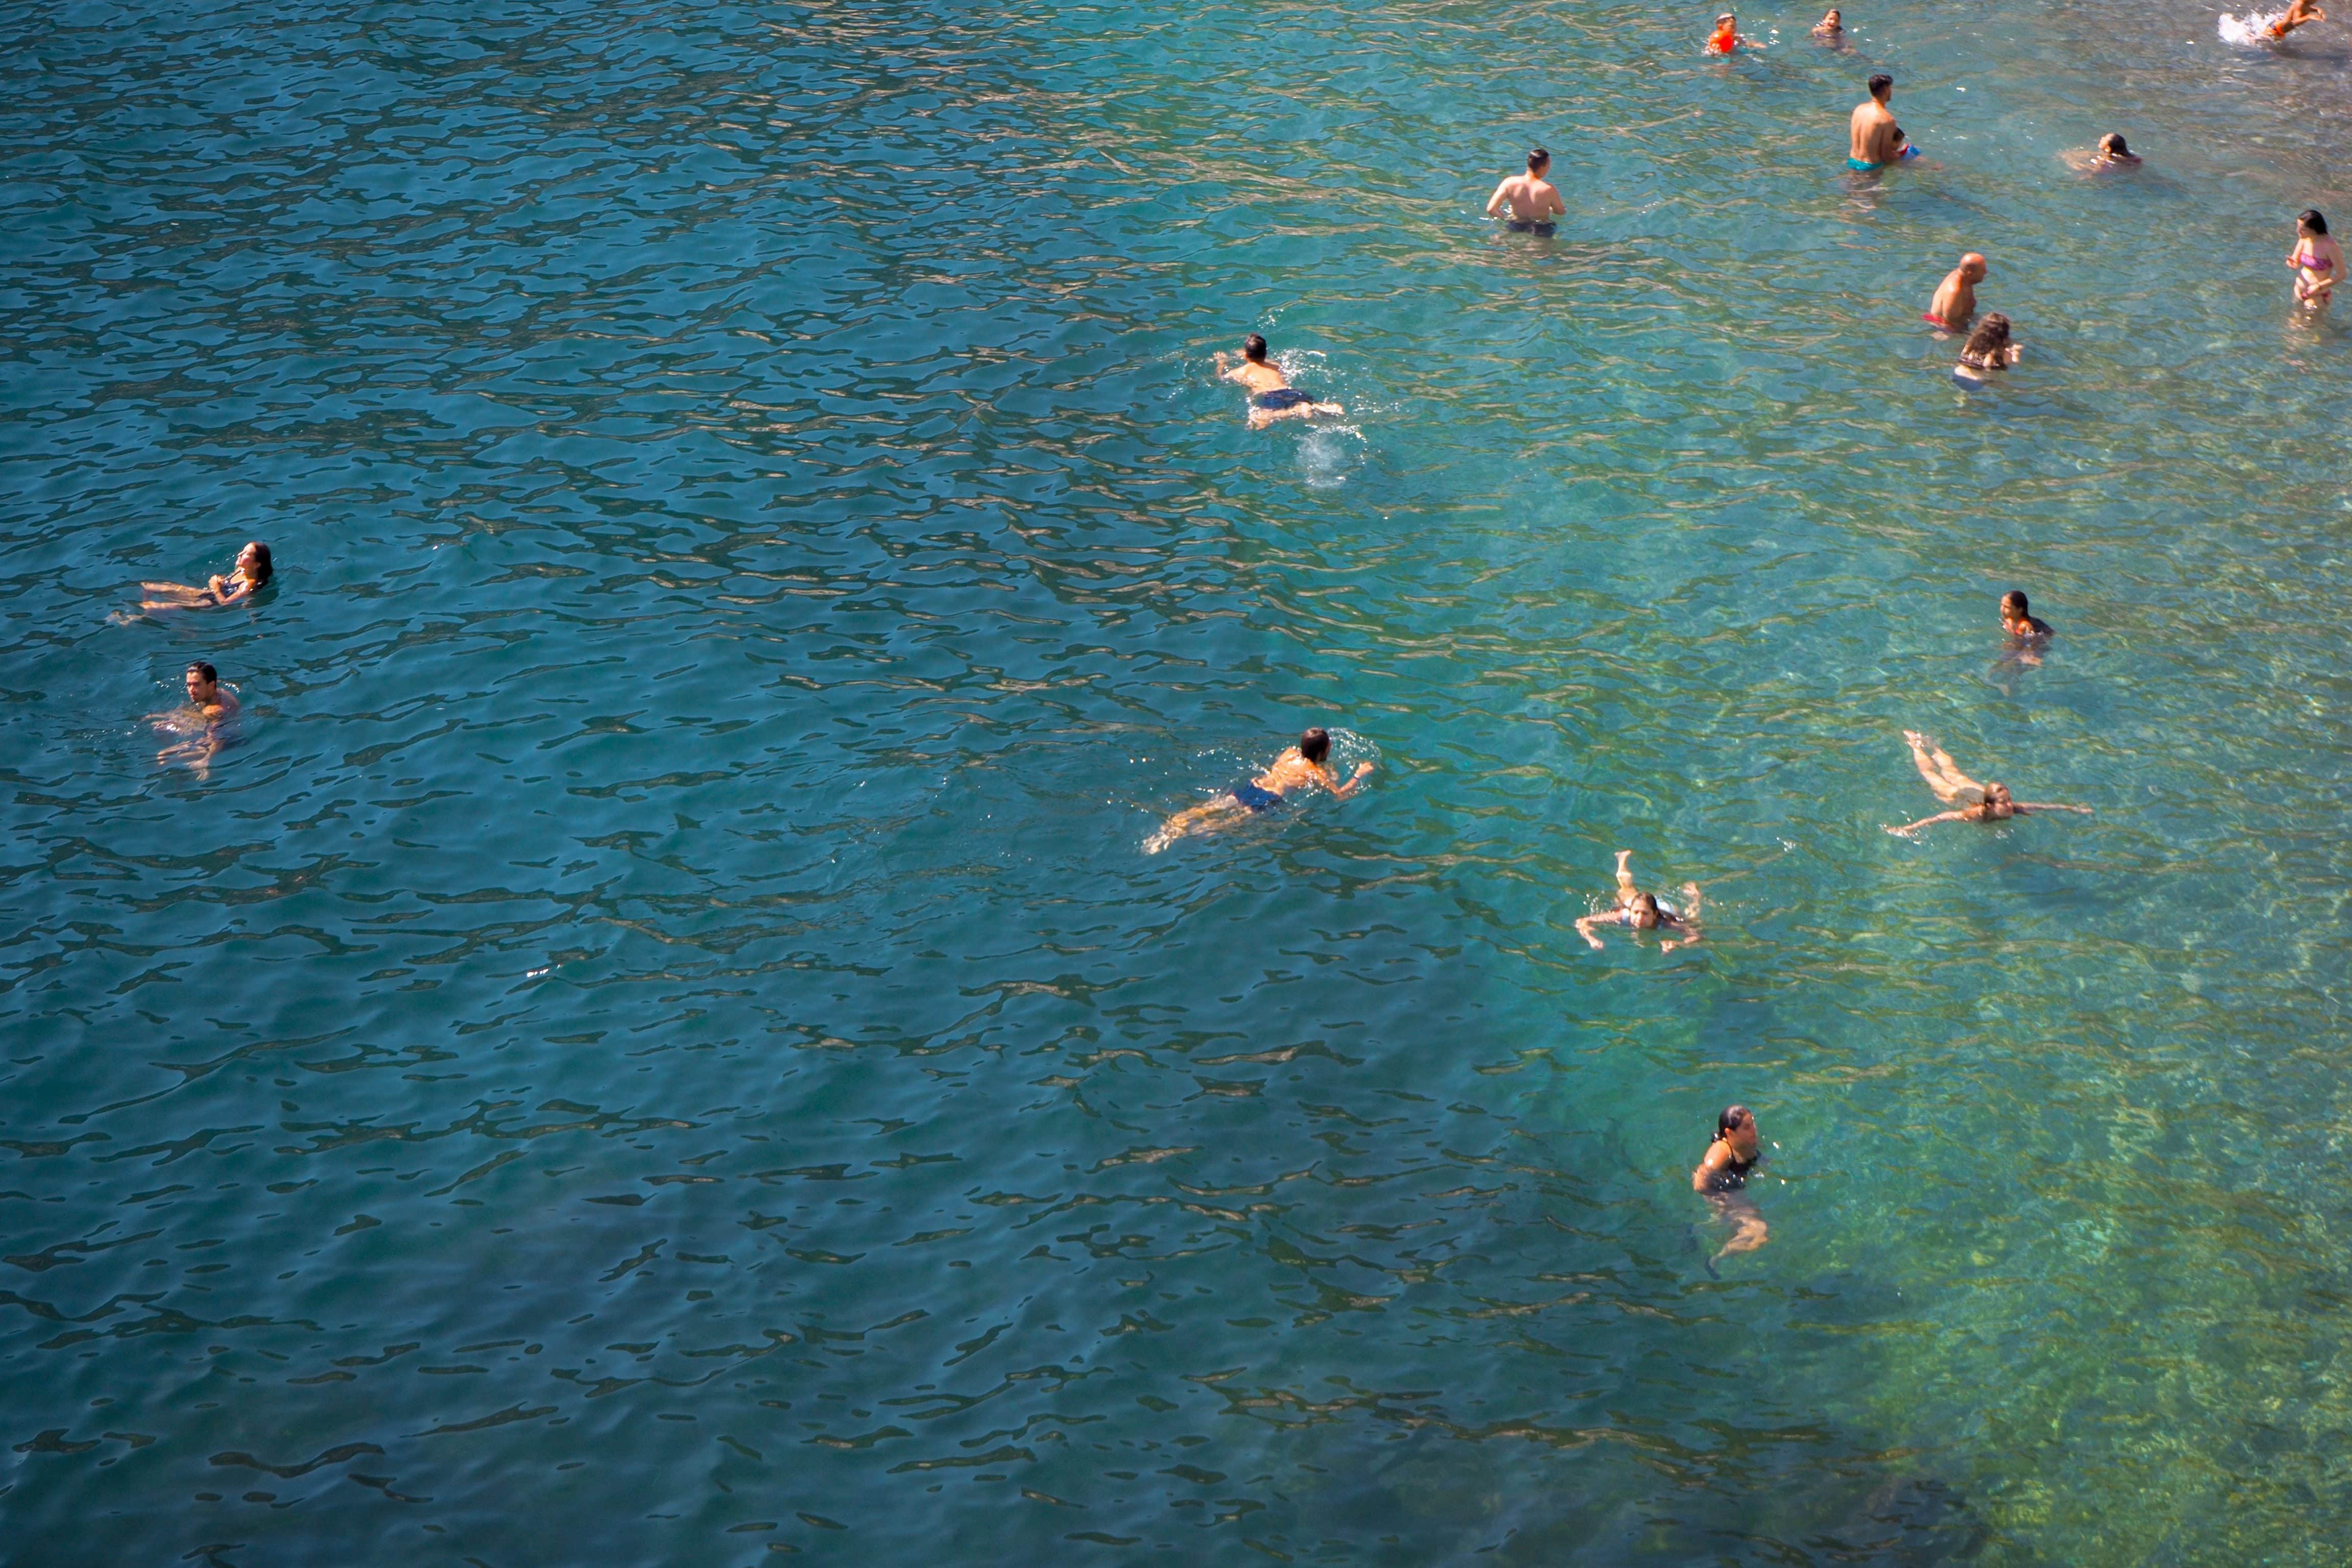 Swimming at the map of the Amalfi Coast